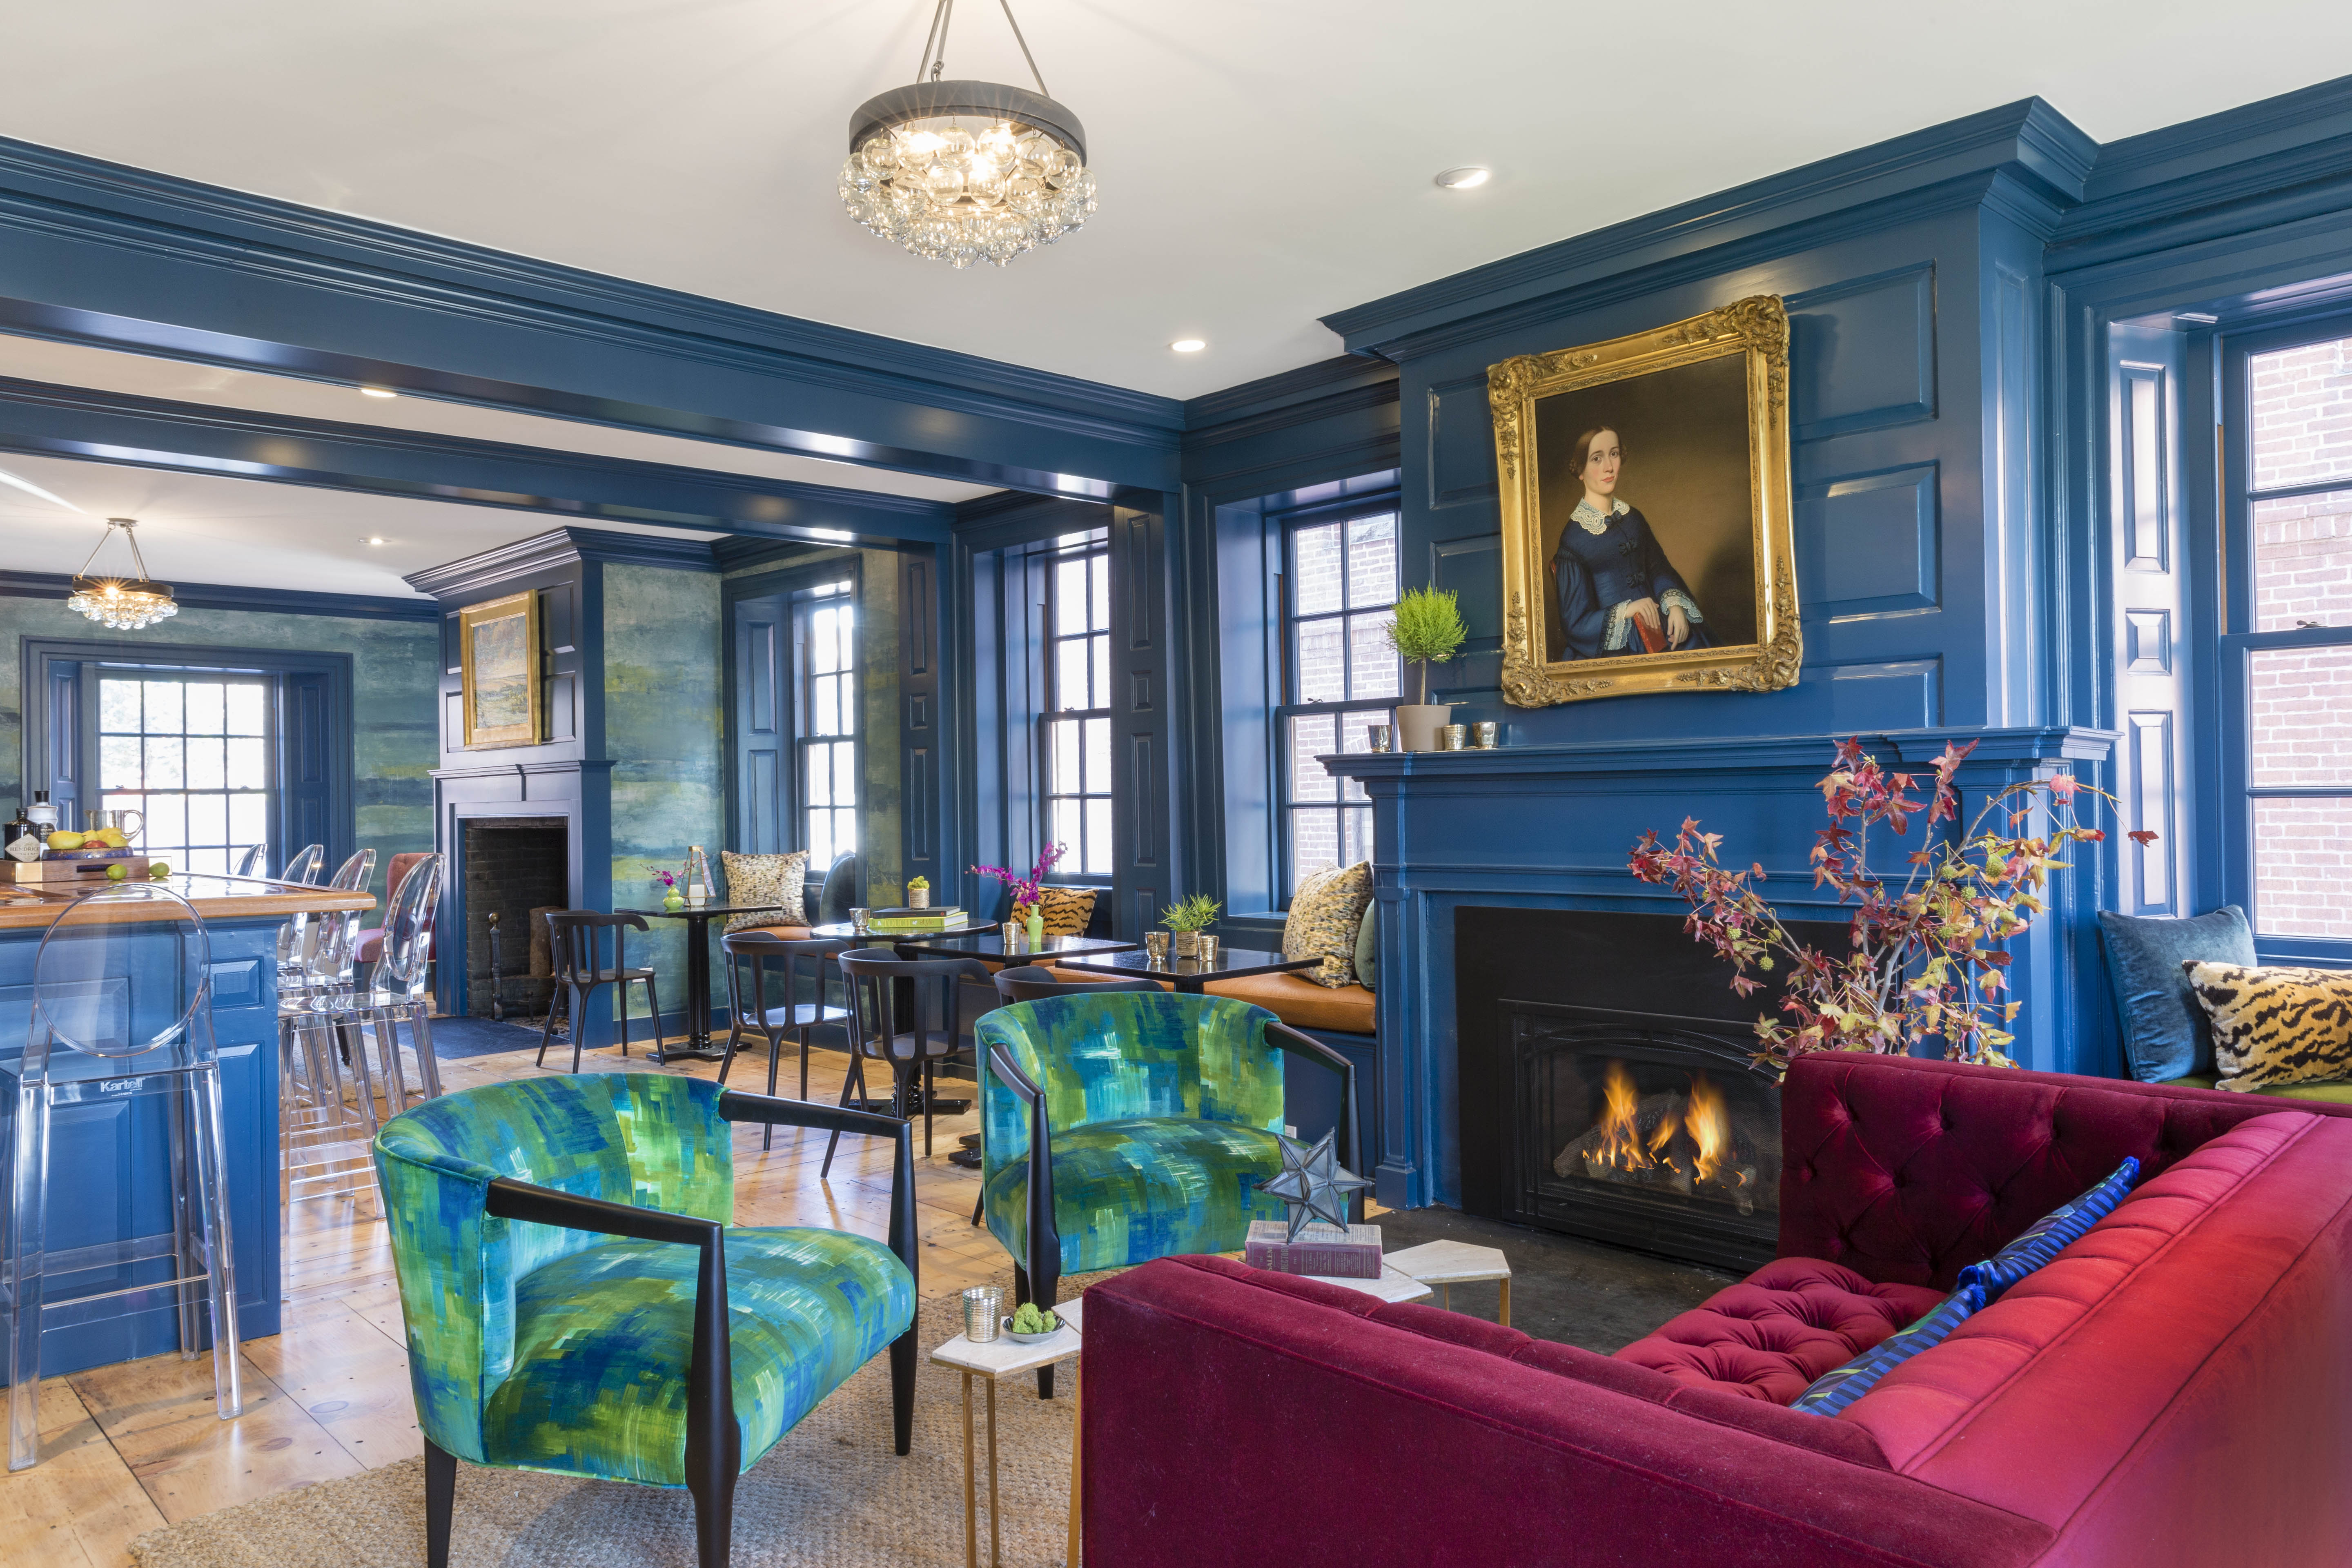 An interior of a hotel in Salem Massachusetts painted vivid blue on the walls with eclectic furniture